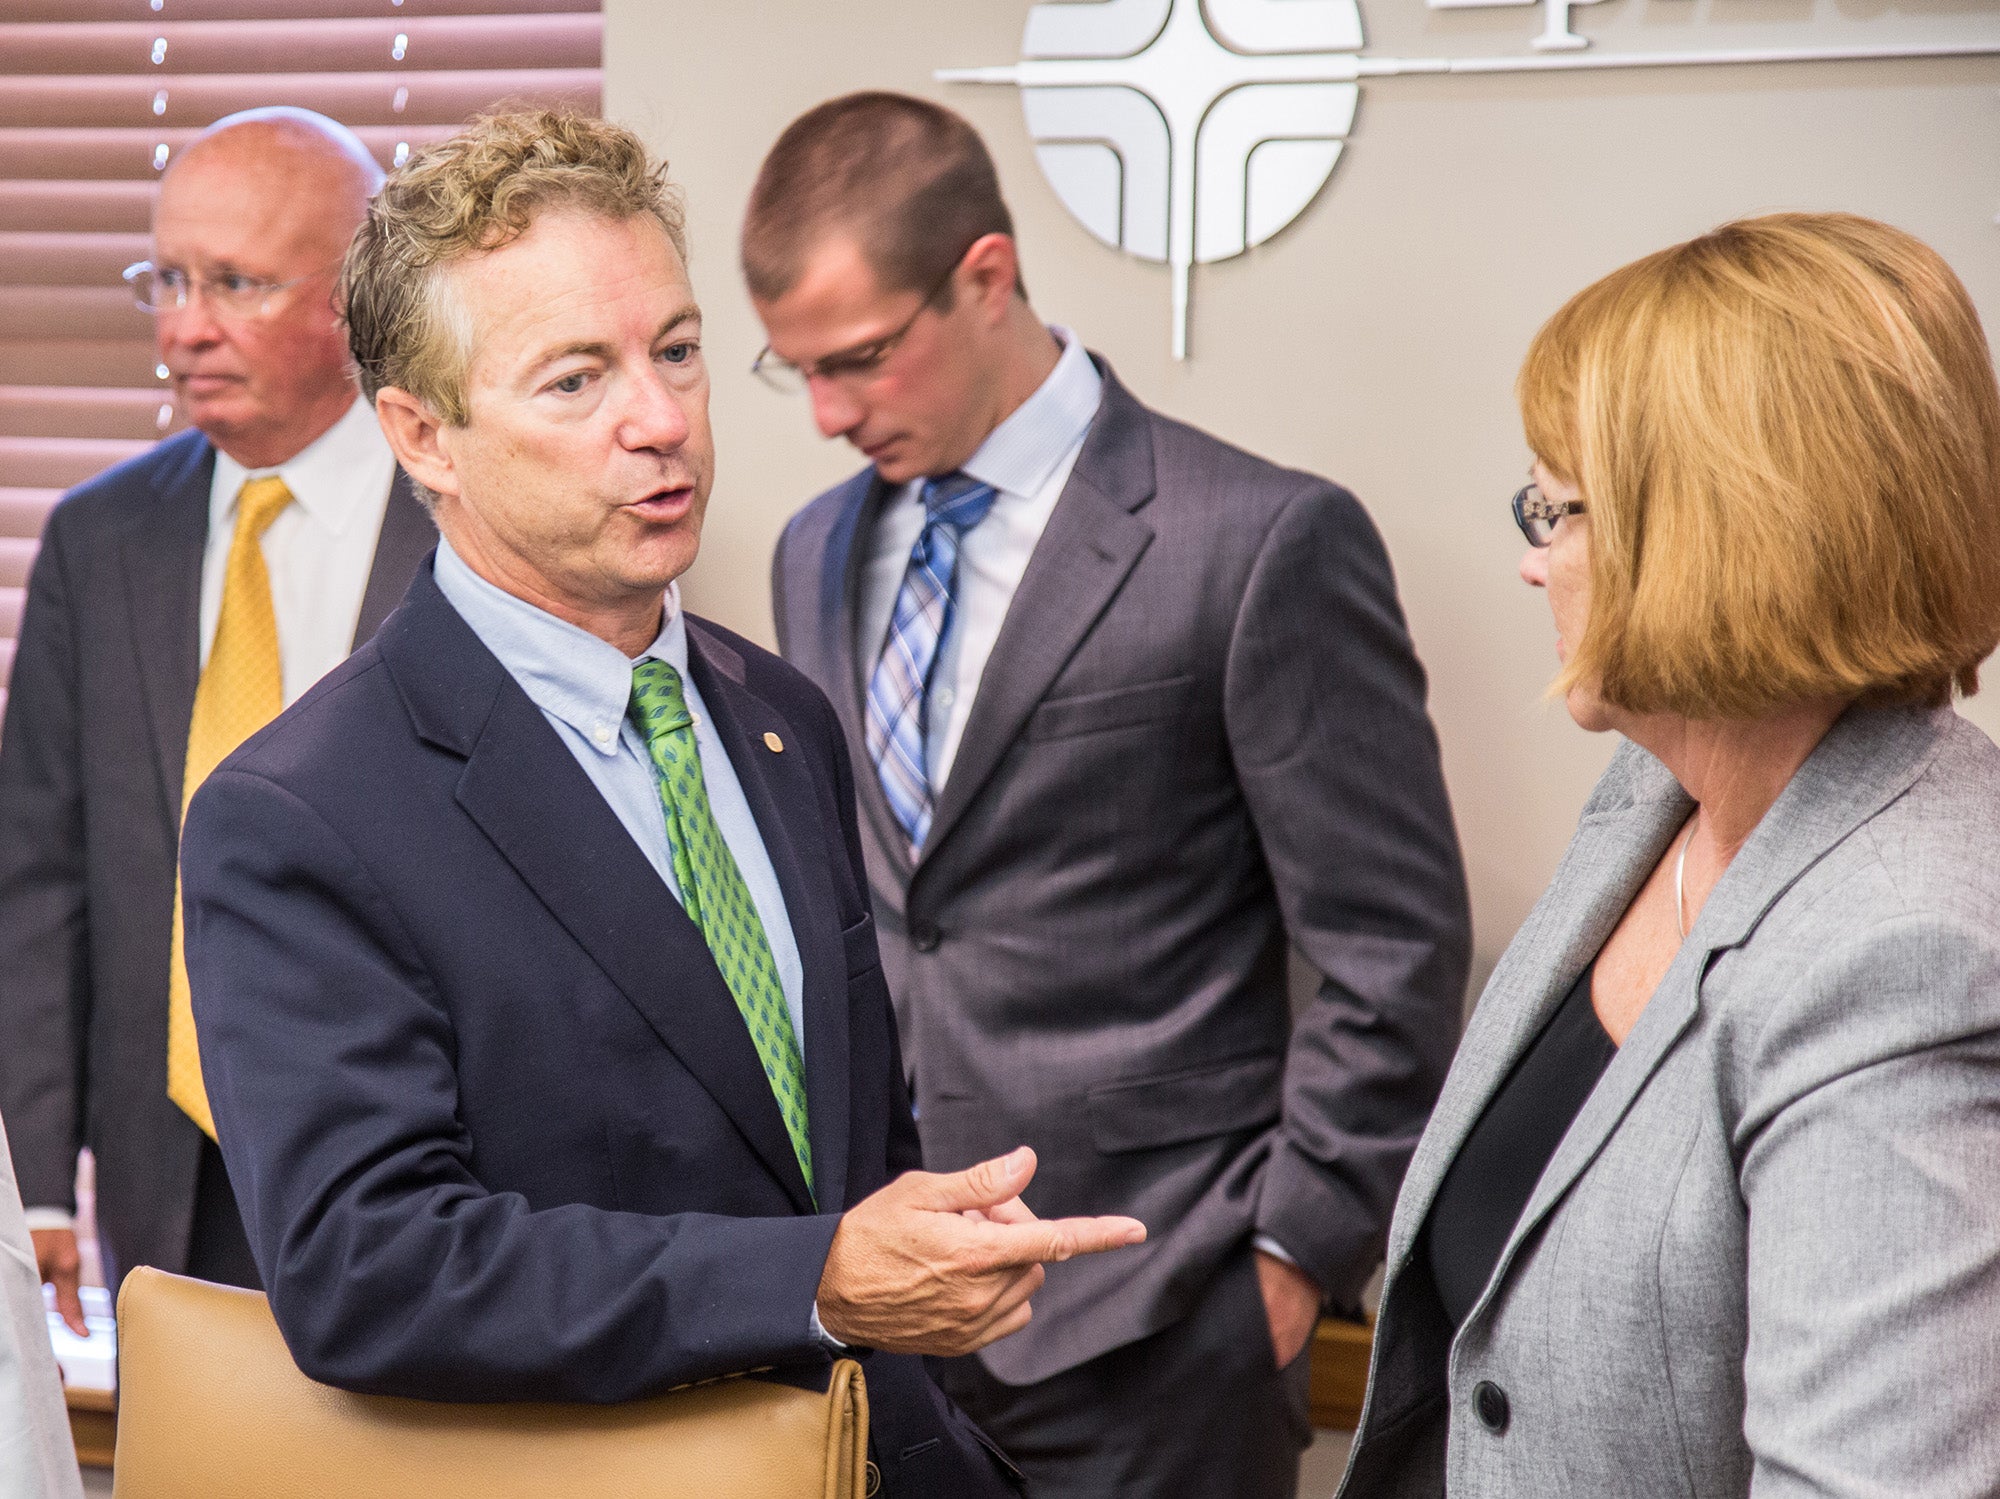 U.S. Sen. Rand Paul speaks with former Chamber of Commerce Director Paula Fowler during a visit to Danville in 2017 for a roundtable event on health care. (File photo by Ben Kleppinger)